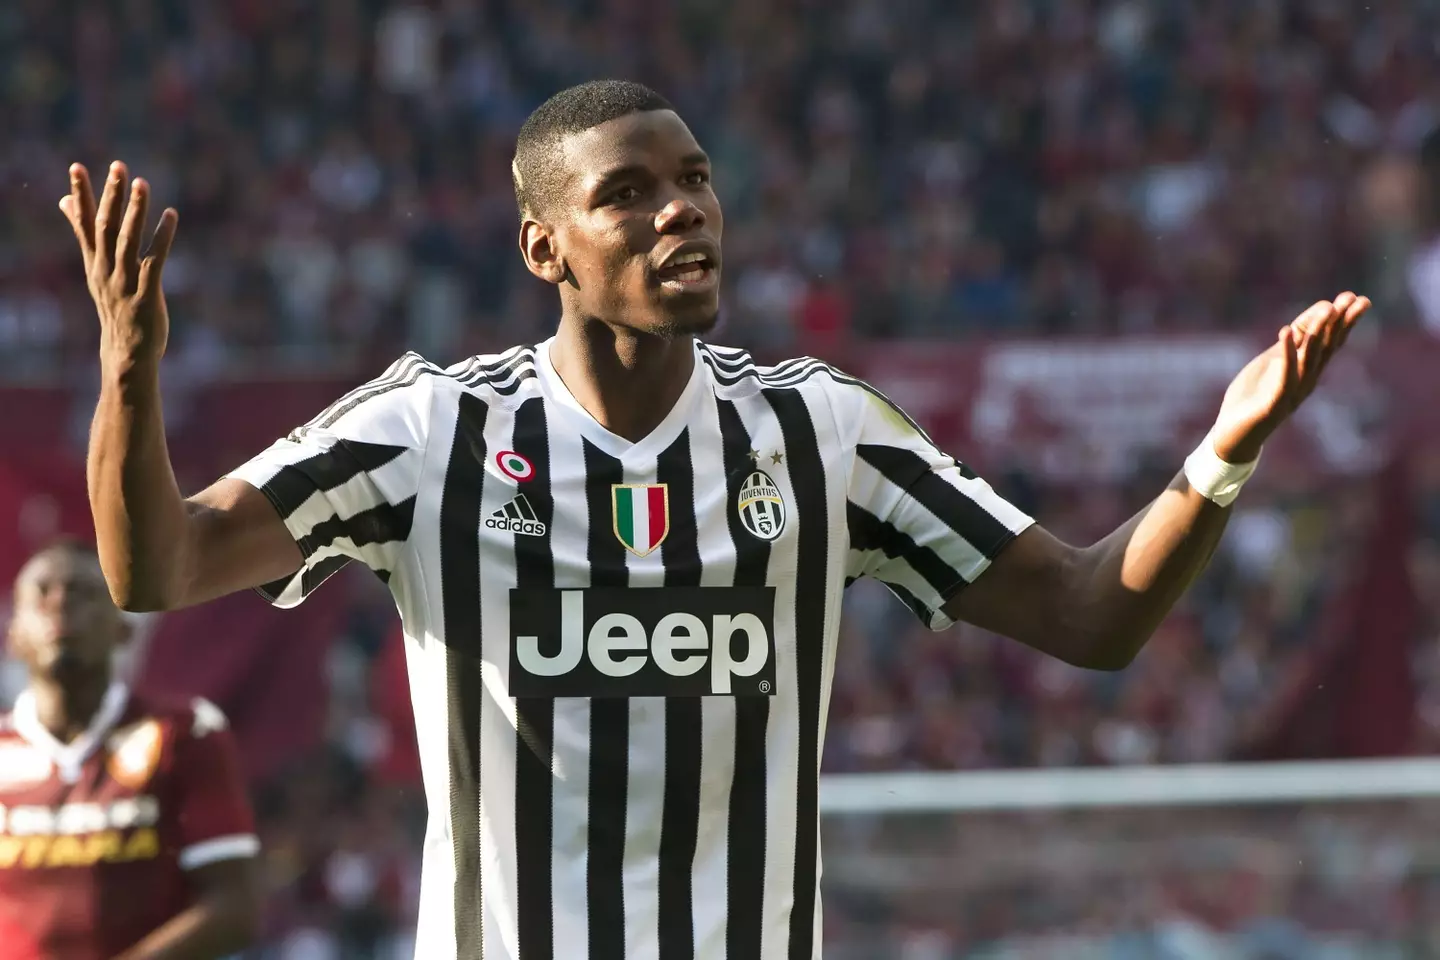 Paul Pogba could potentially be axed by Juventus, despite only returning to Italy last summer.